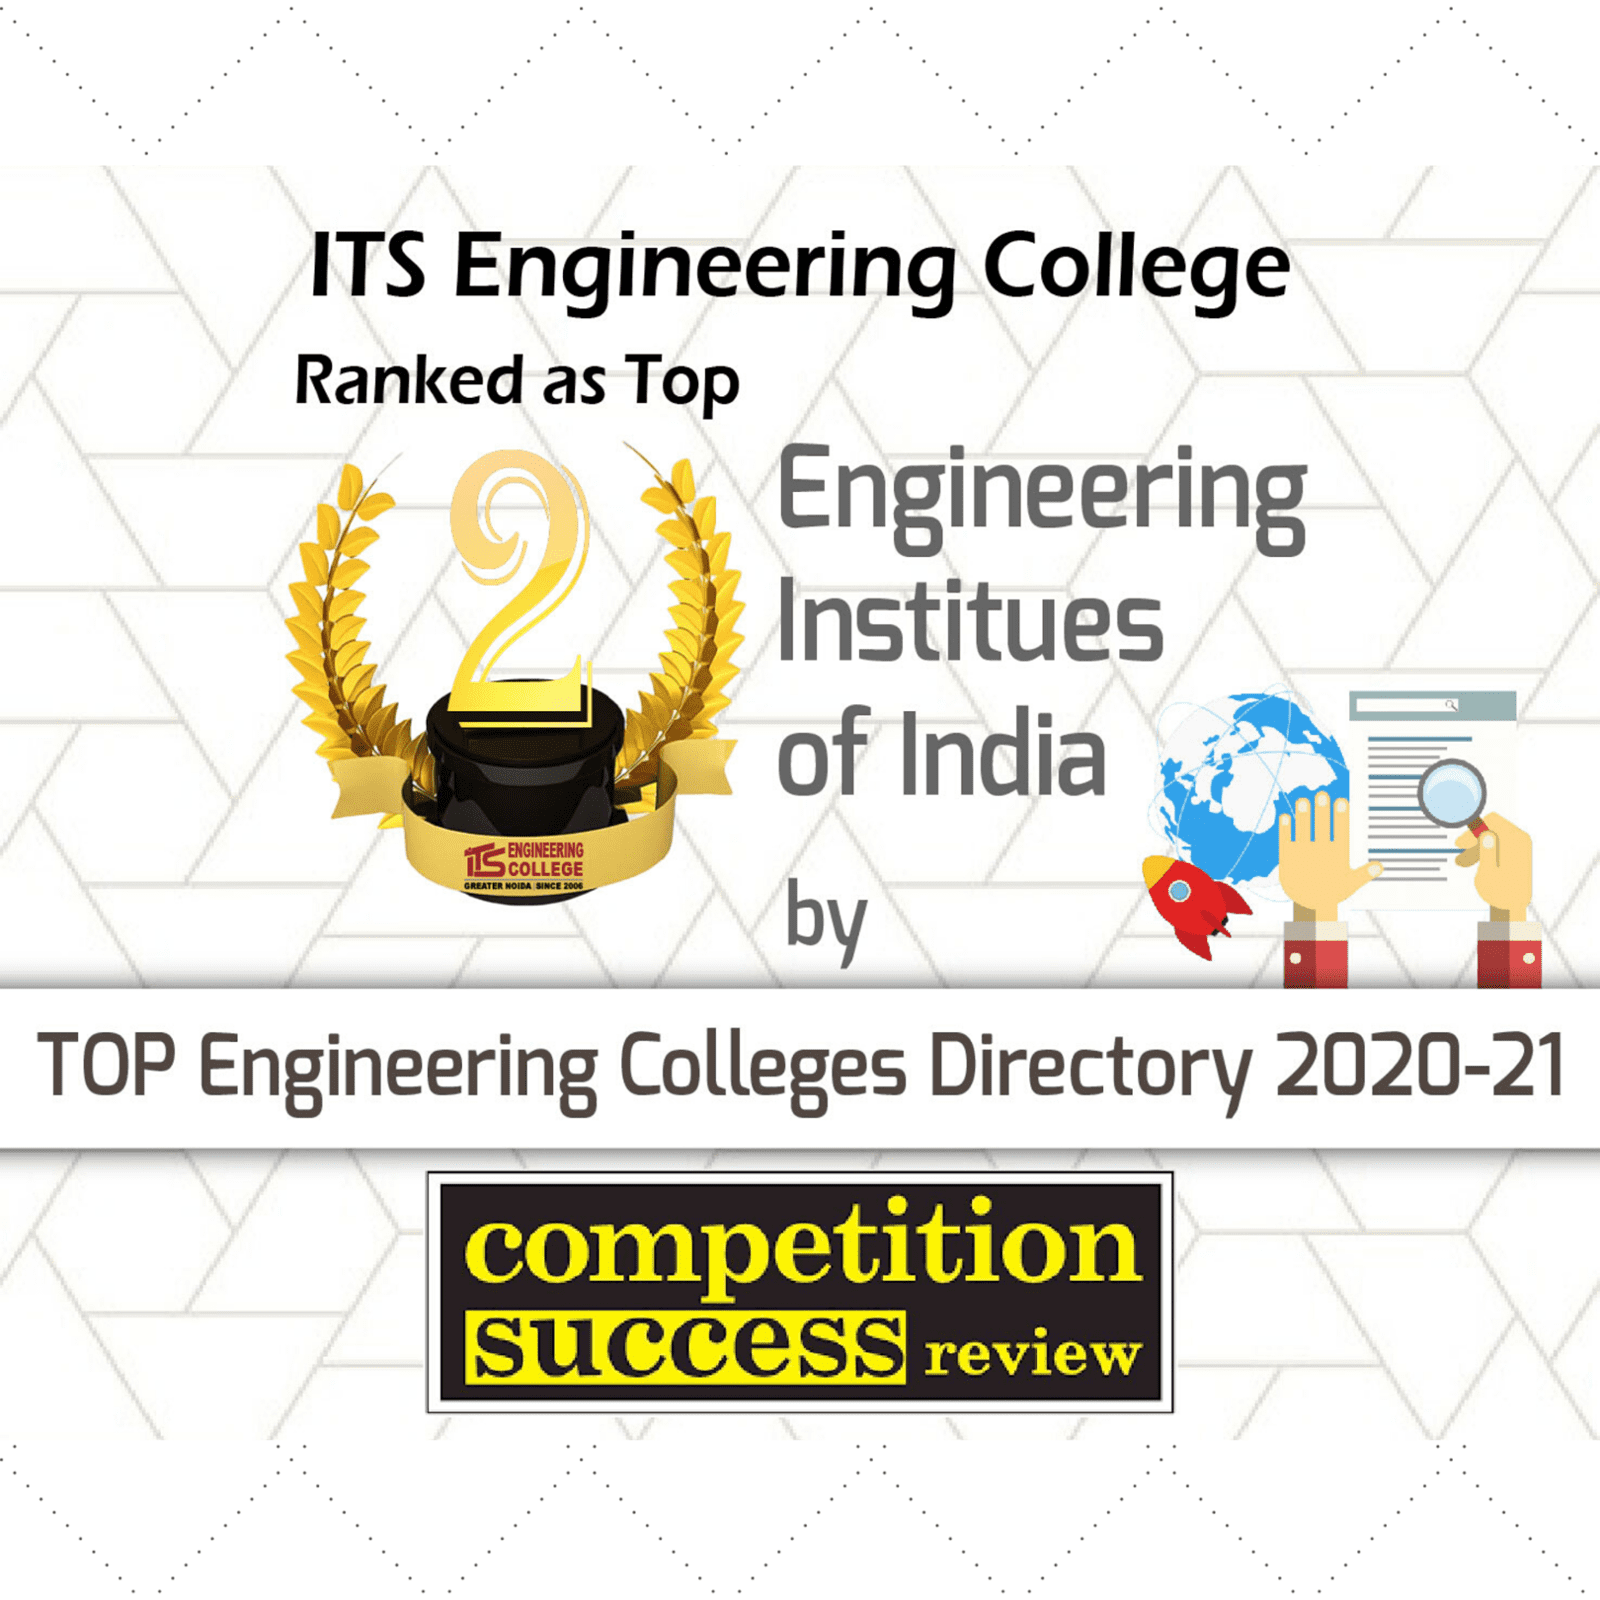 ITS Ranked as Top Engineering College by Competition Success Review